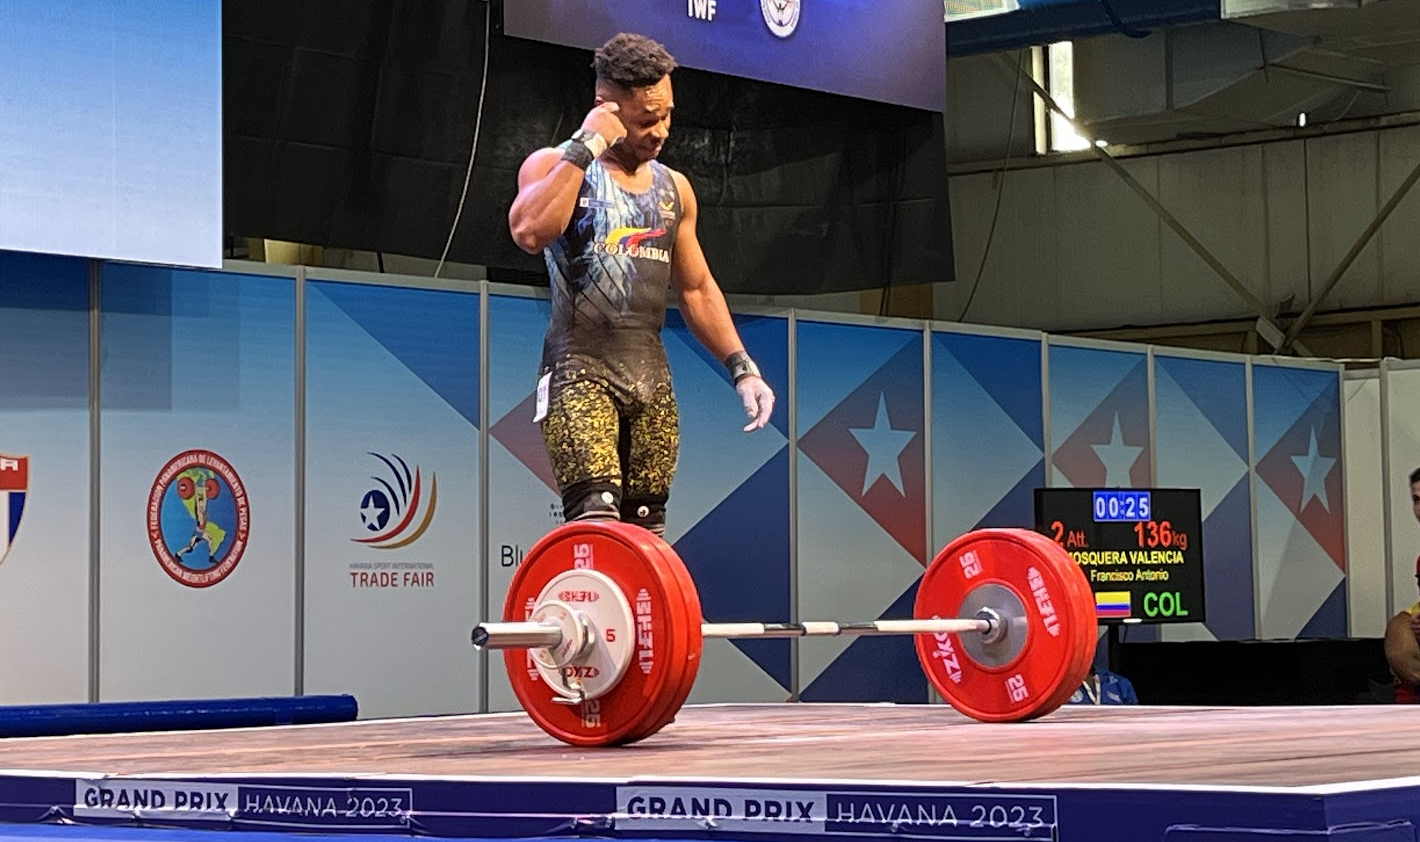 Colombia's 67kg world champion Francisco Mosquera had to settle for third behind Indonesia's Eko Yuli Irawan, who had moved up a weight, at the IWF Grand Prix in Havana ©ITG